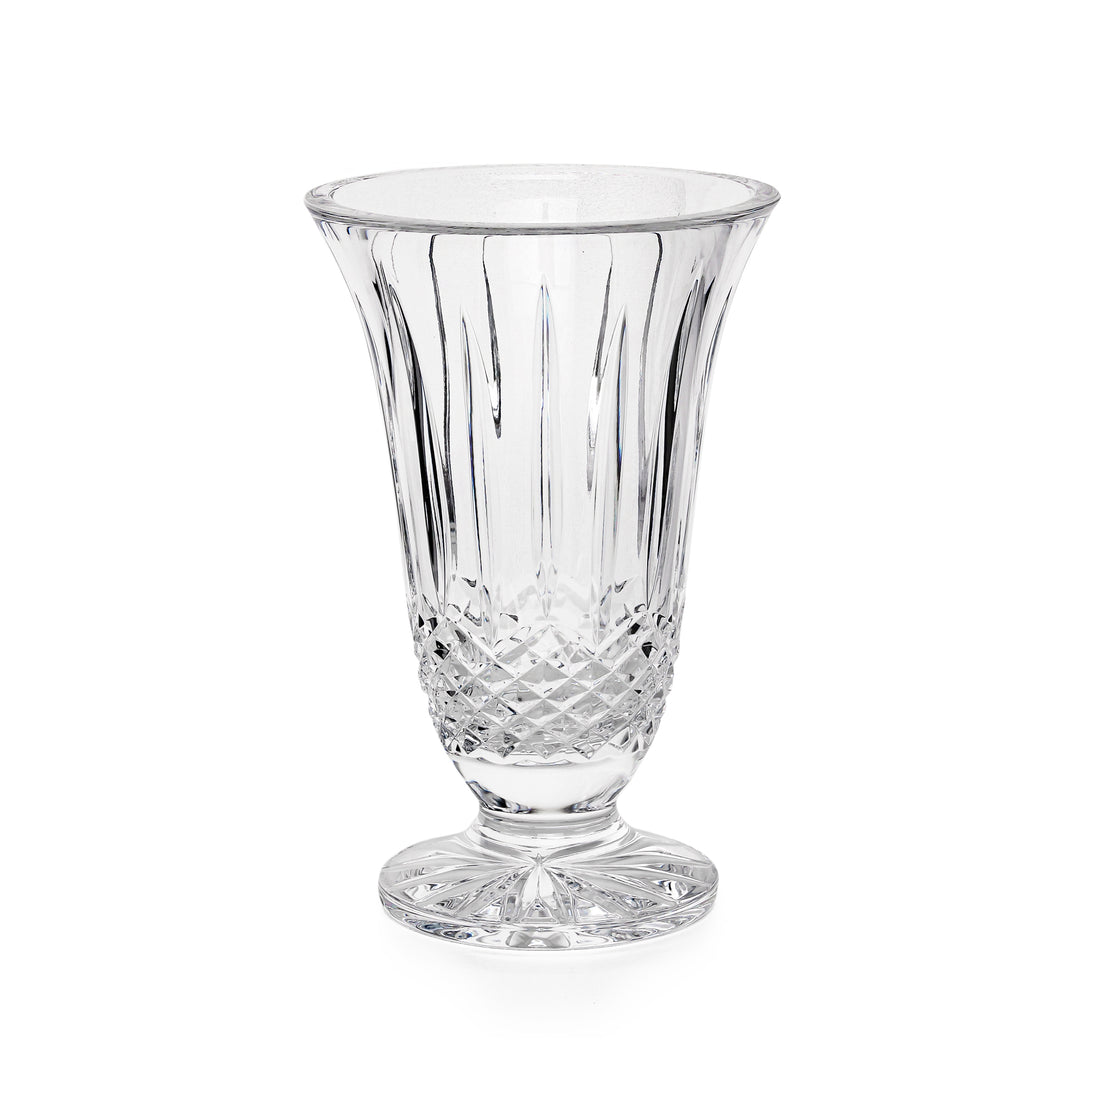 WATERFORD Lismore Footed Flare Vase